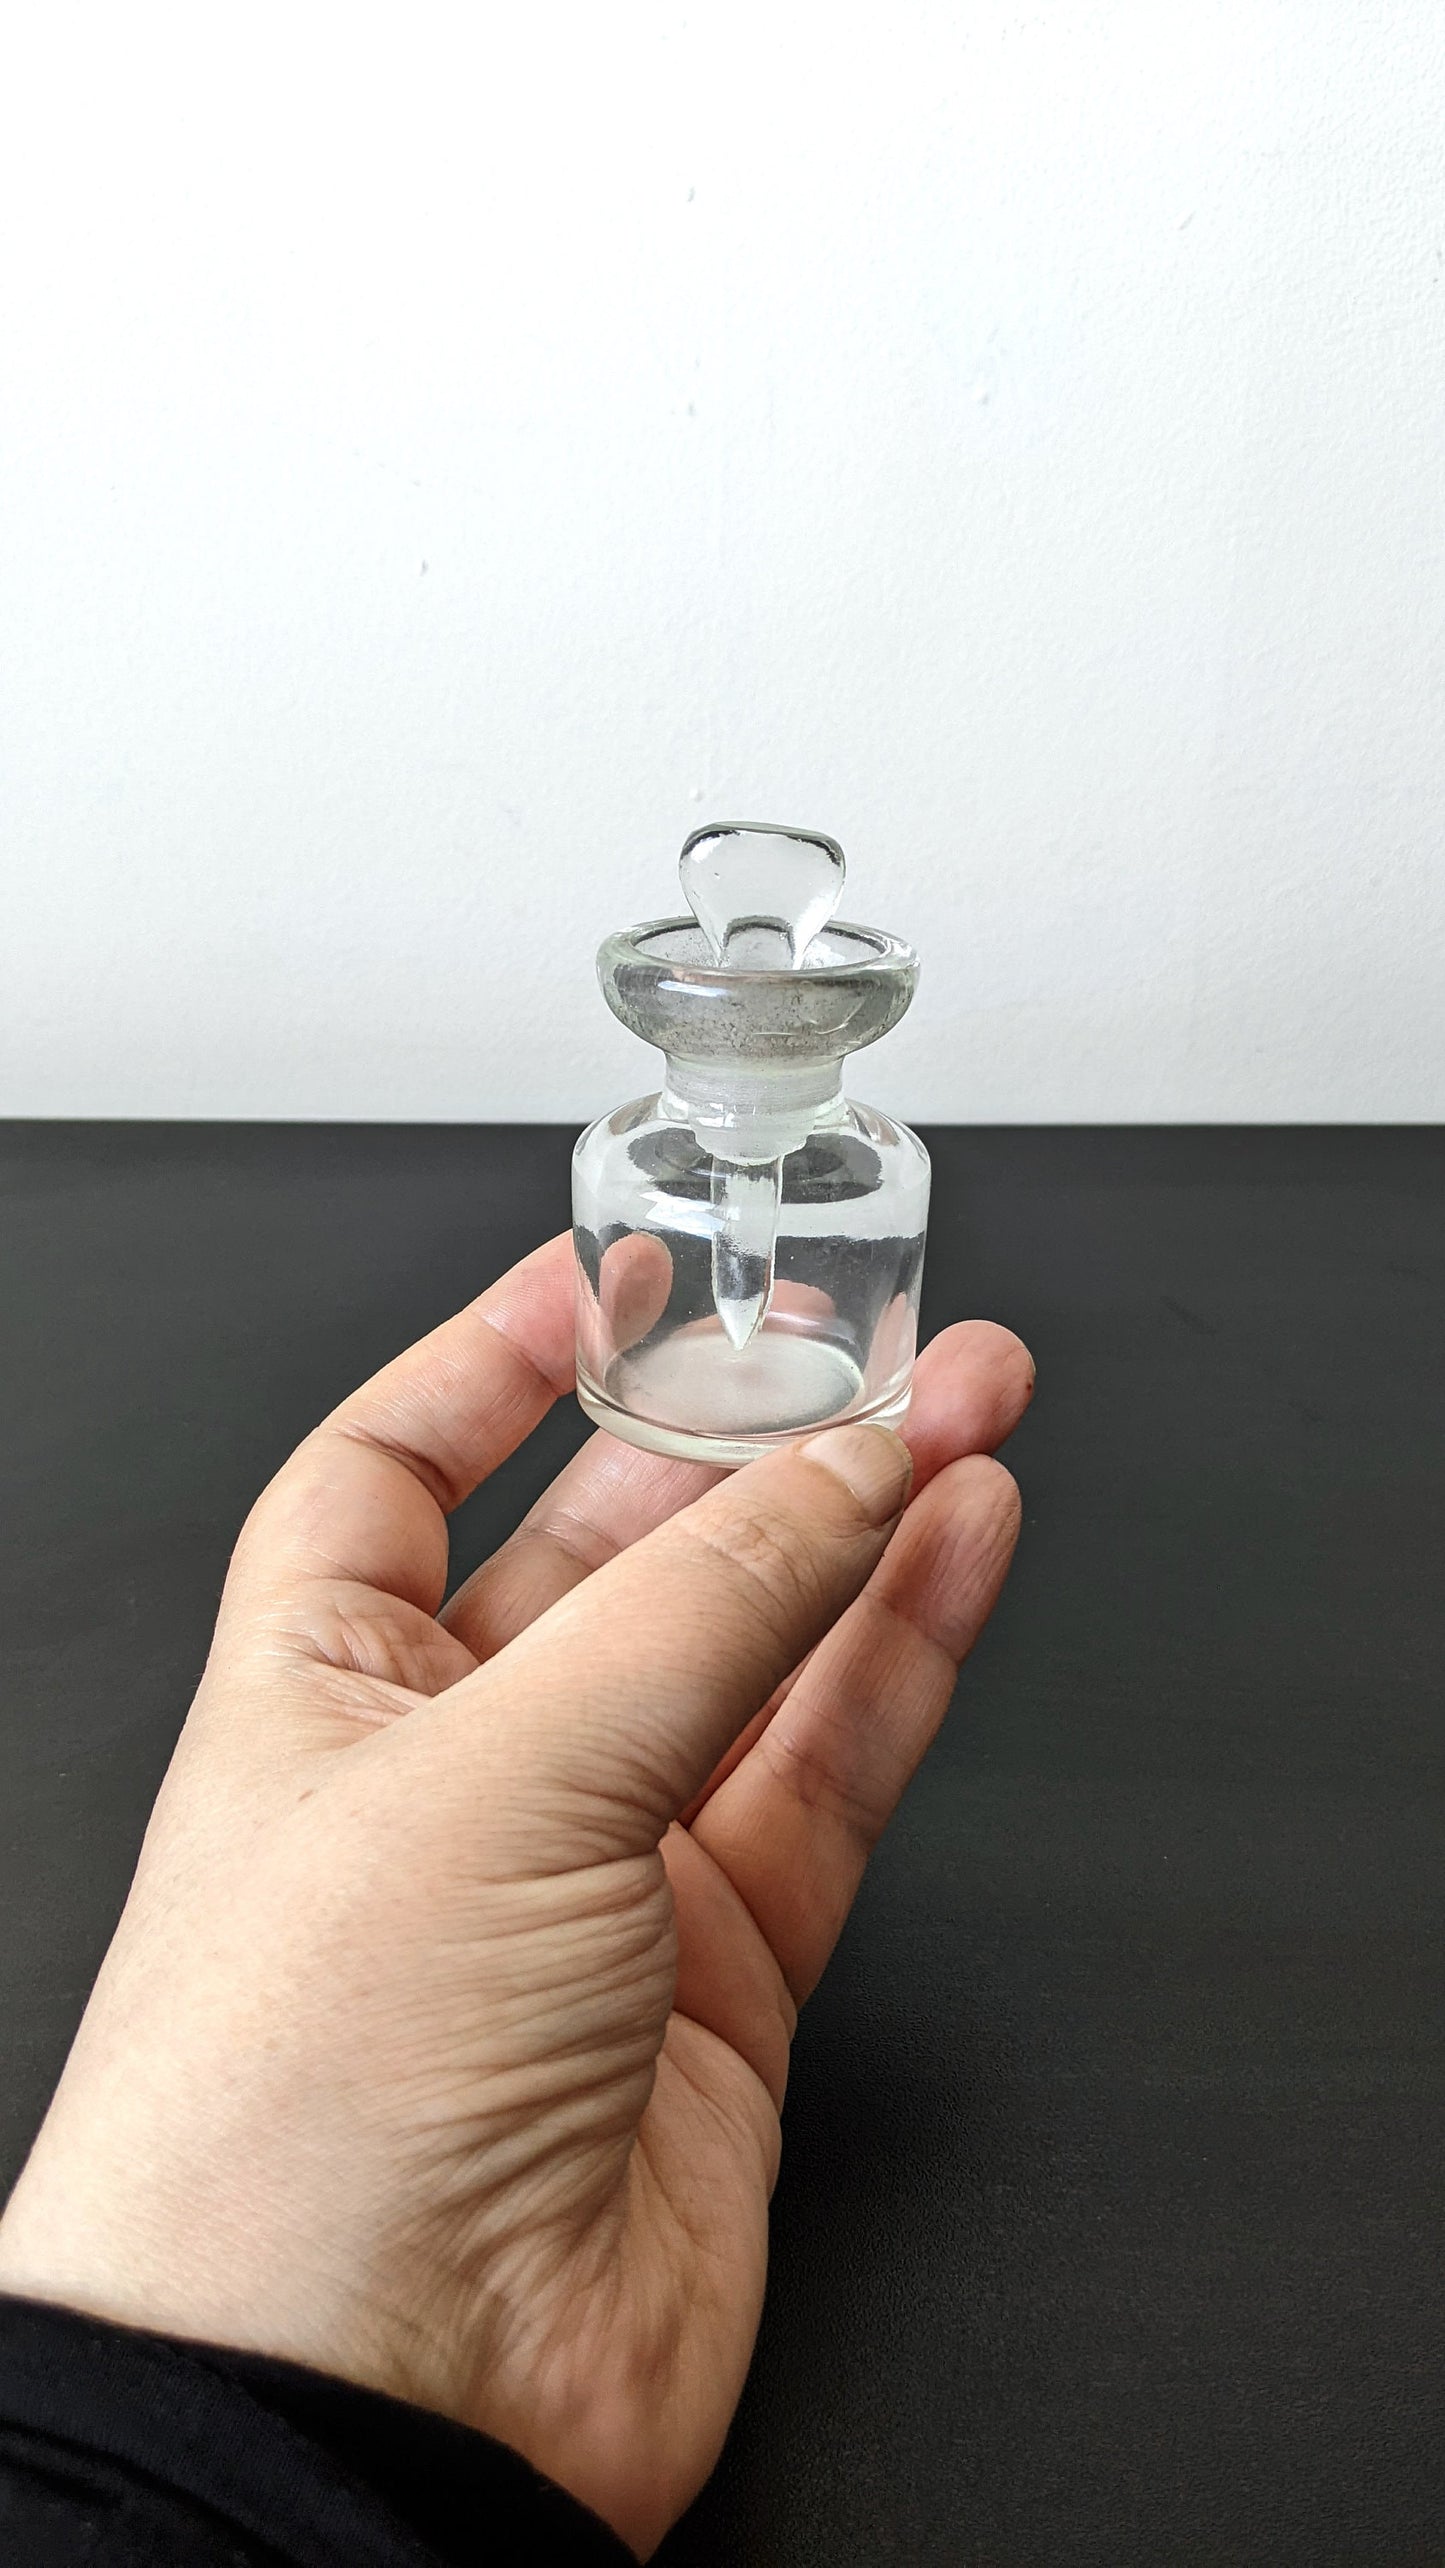 1920s Apothecary Dropper Bottle, Clear Glass Pharmacy Storage